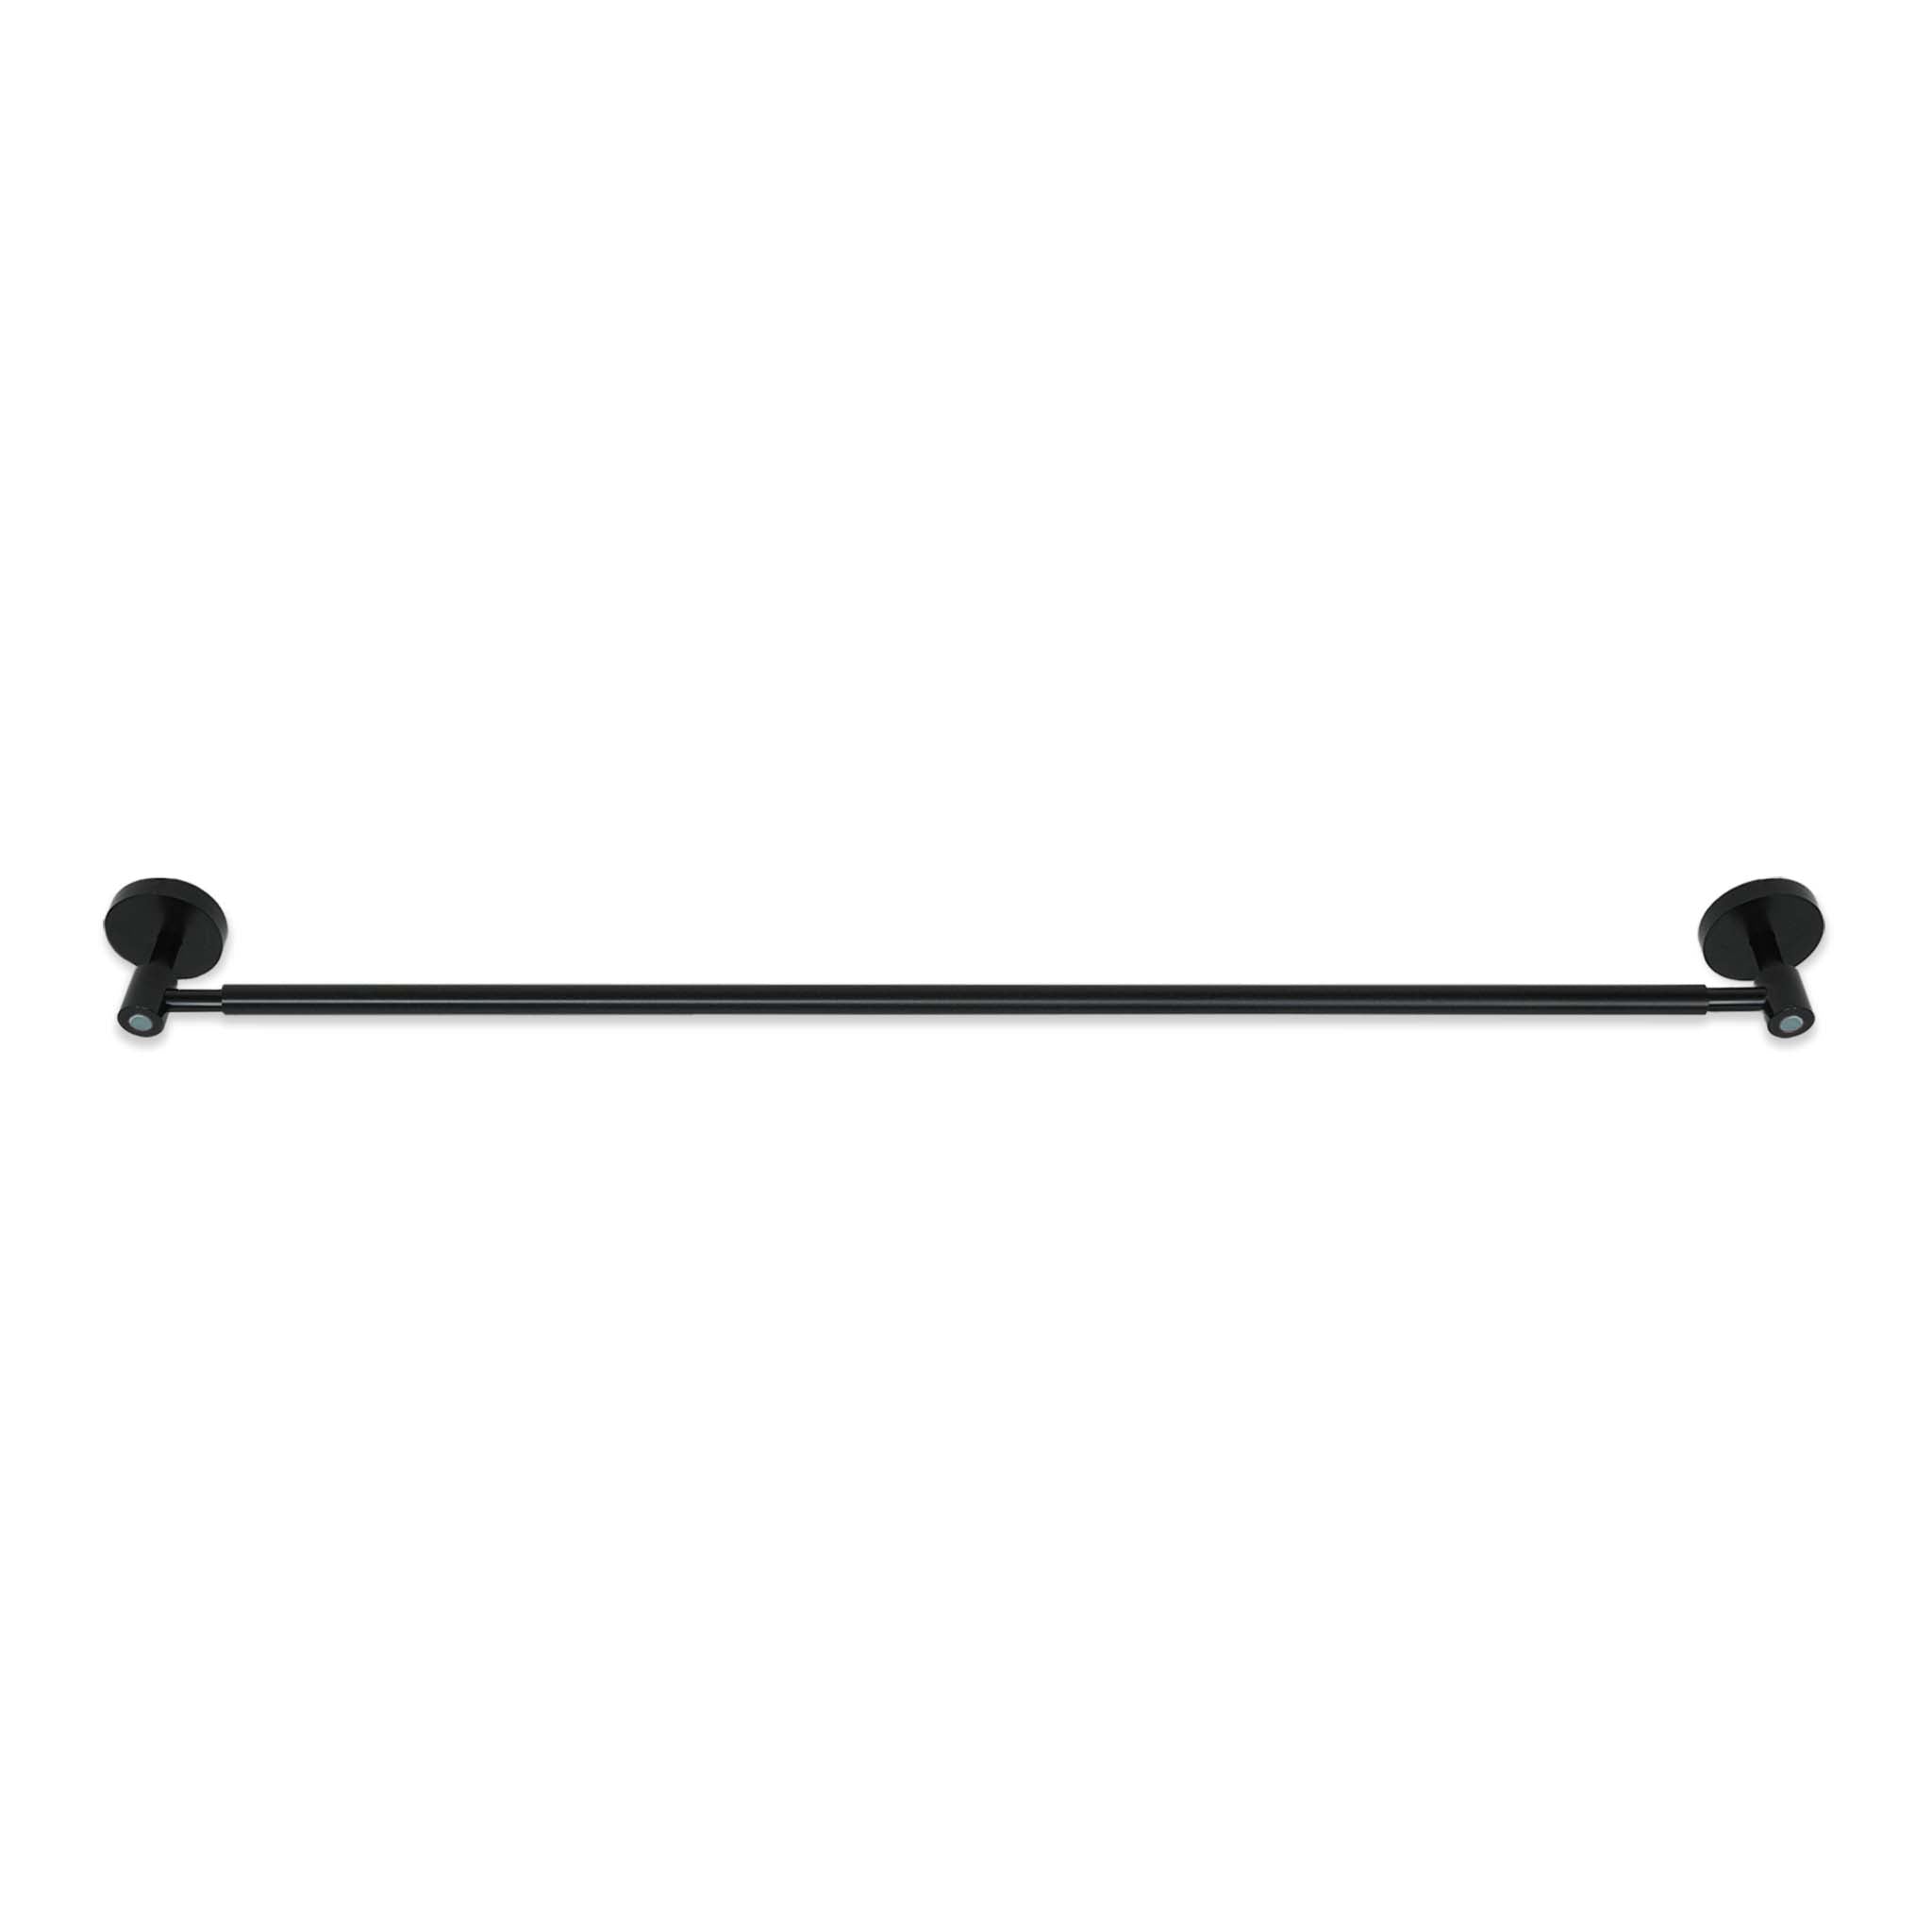 Black and lagoon color Head towel bar 24" Dutton Brown hardware